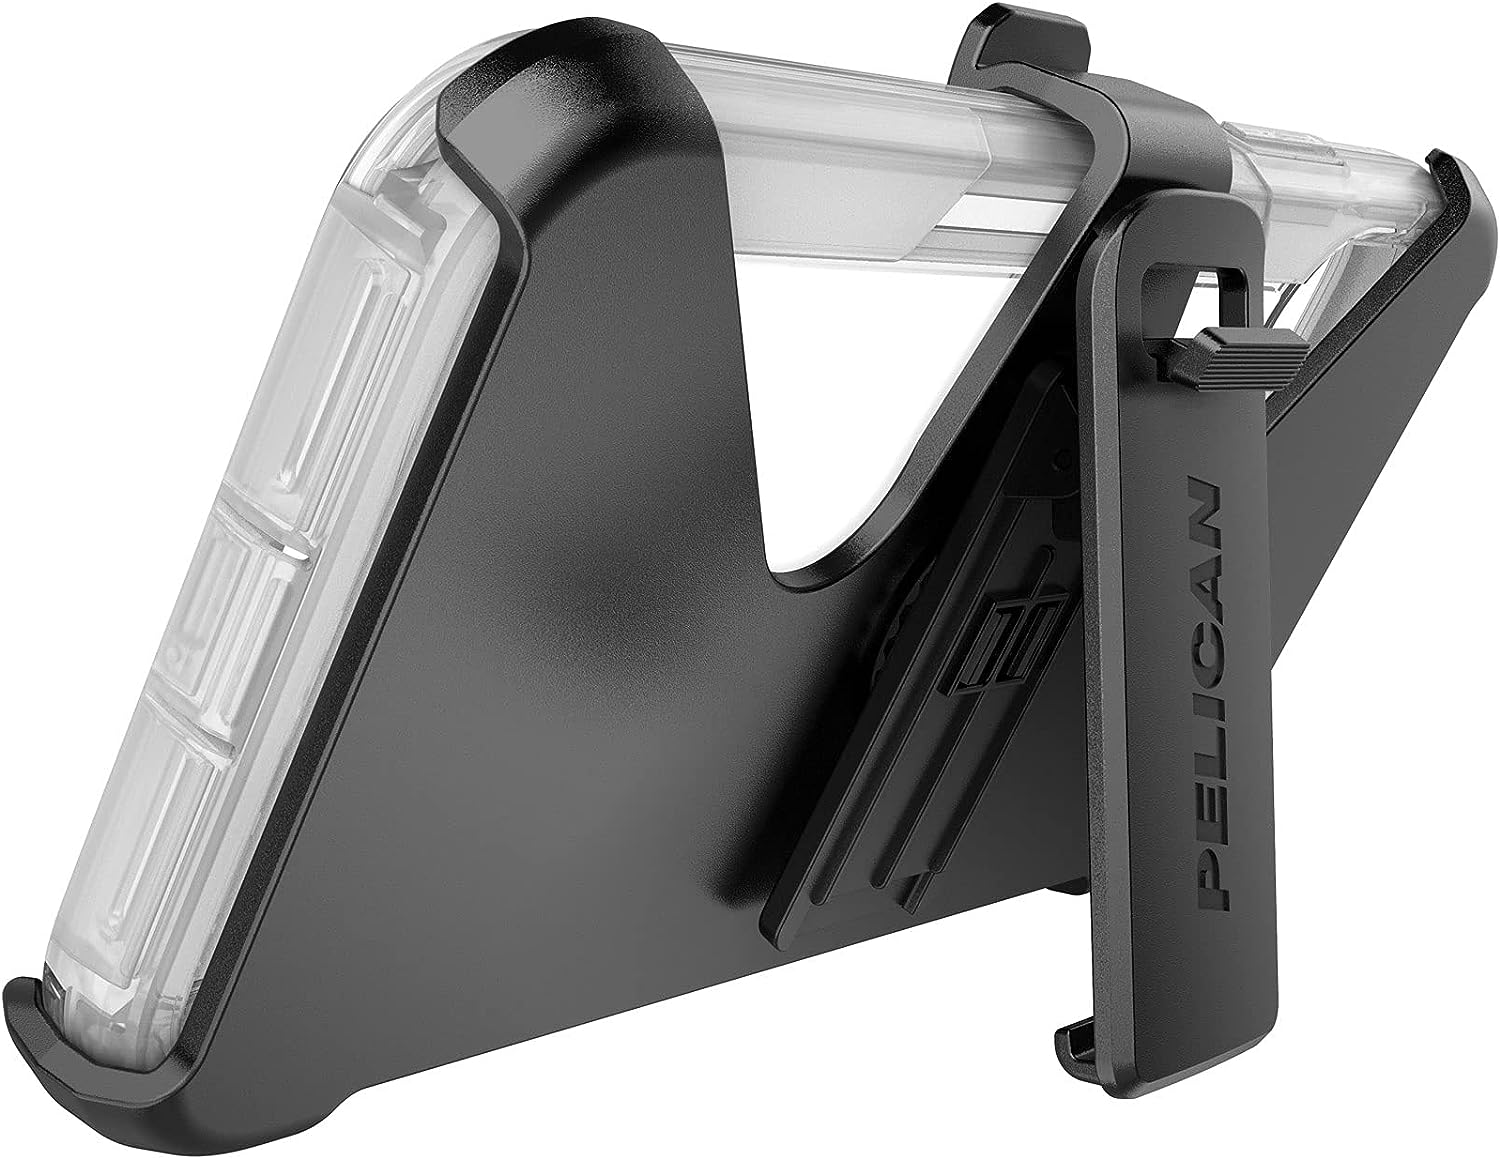 Pelican Voyager Holster Case for iPhone 11 Pro Max, Military Grade Drop Protection - Clear